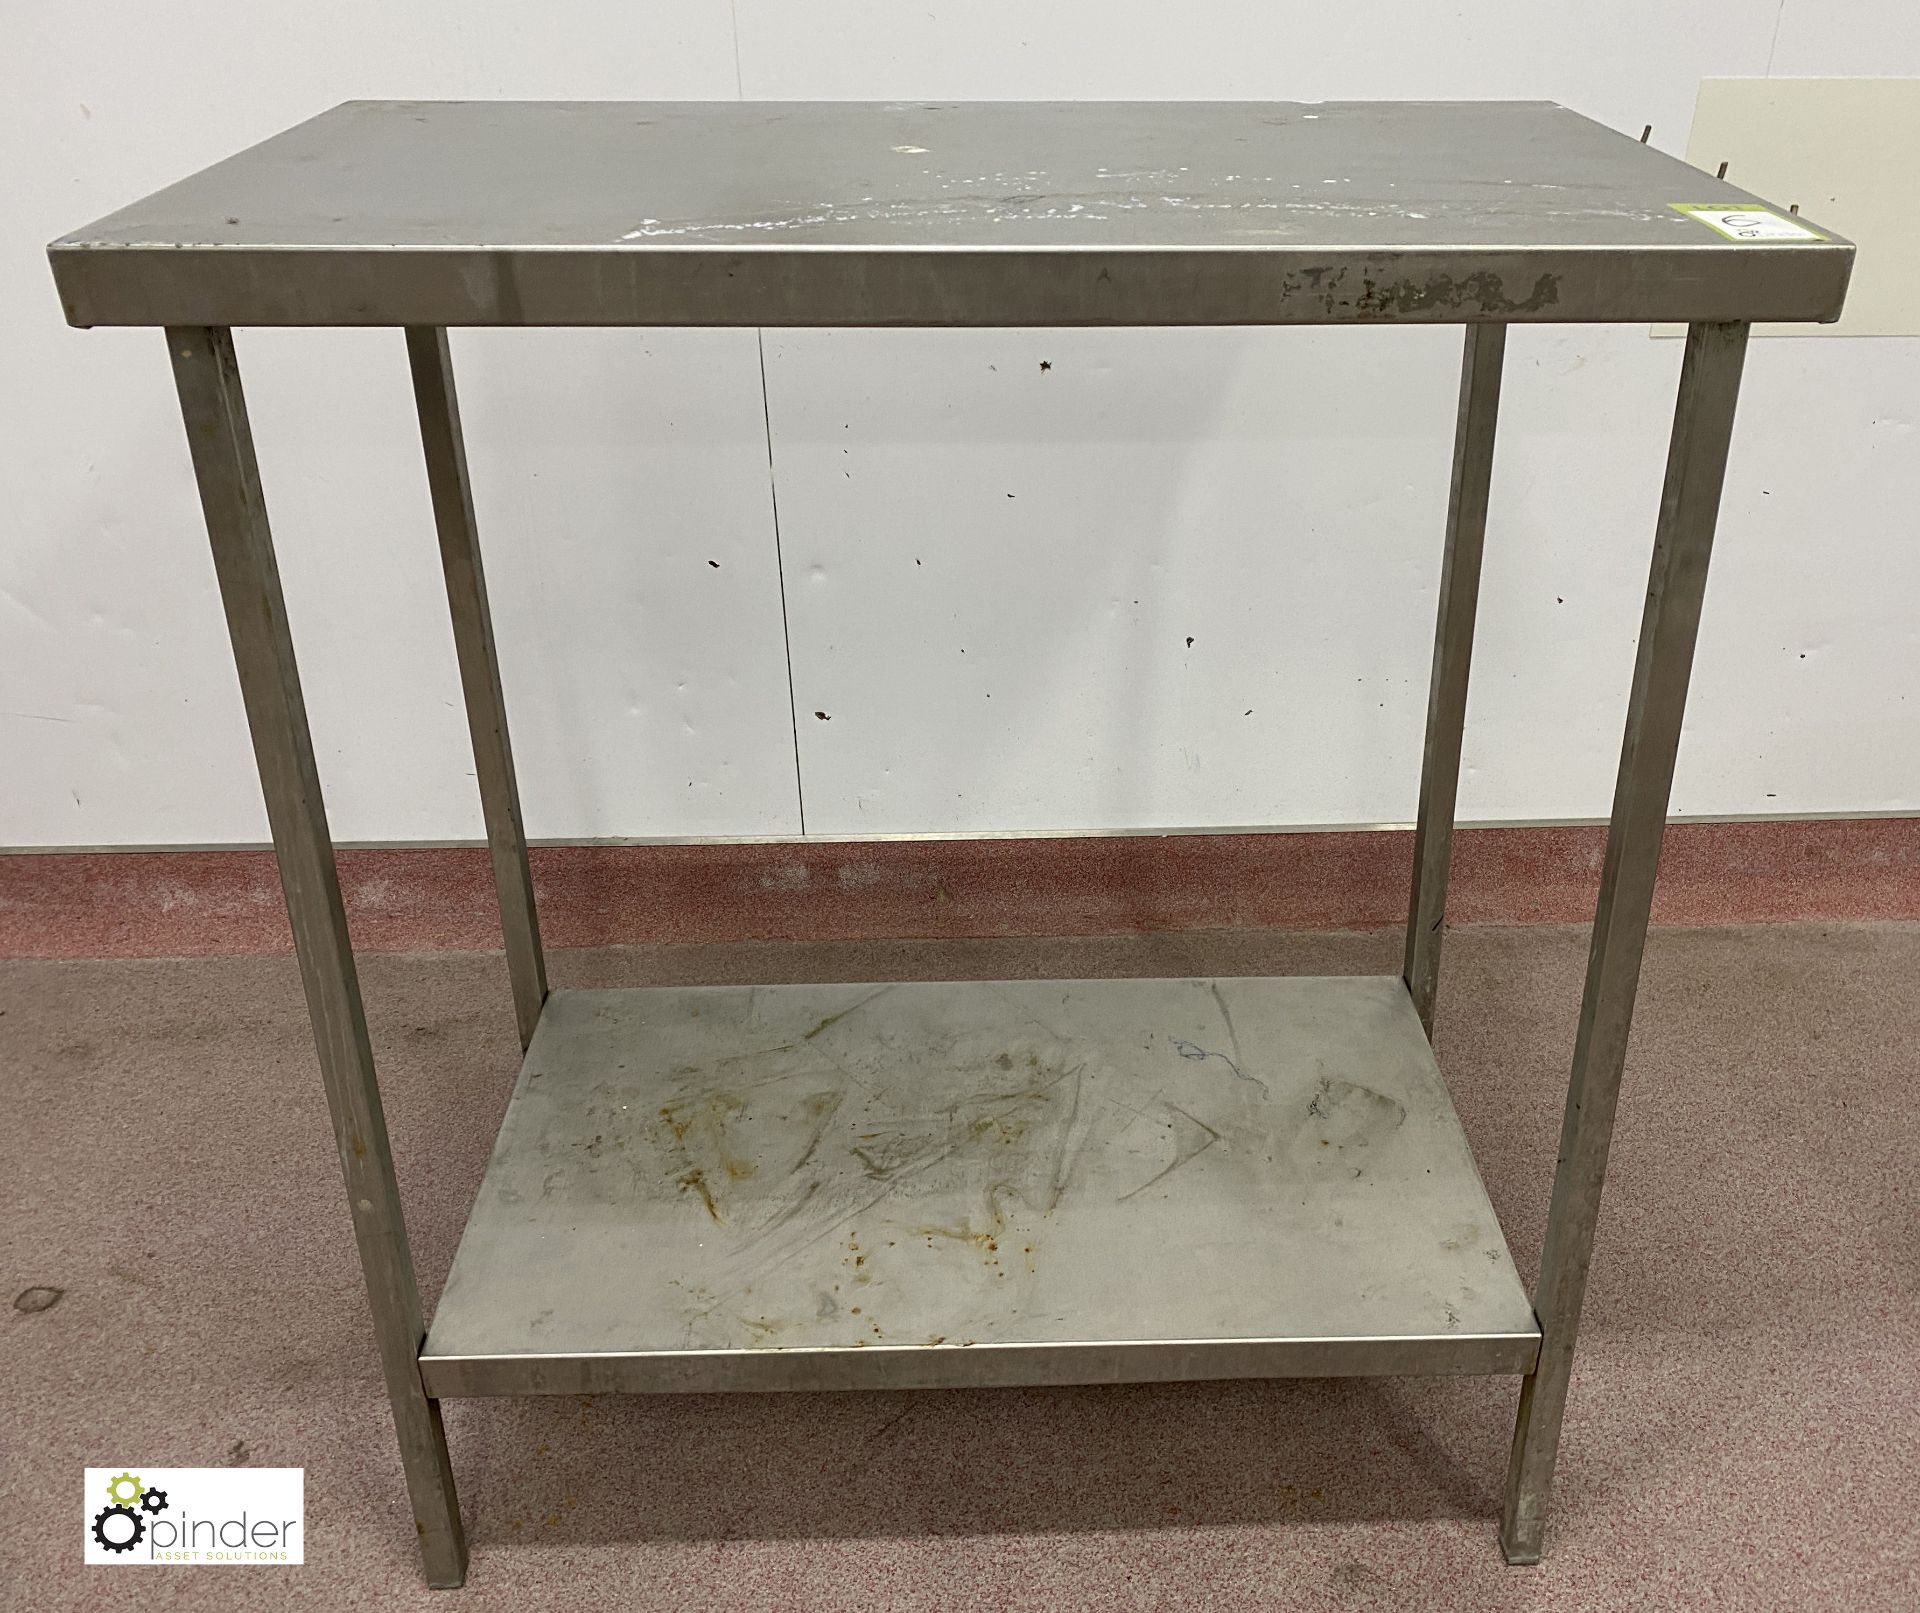 Stainless steel high Preparation Table, 1100mm x 600mm x 1175mm (please note there is a lift out fee